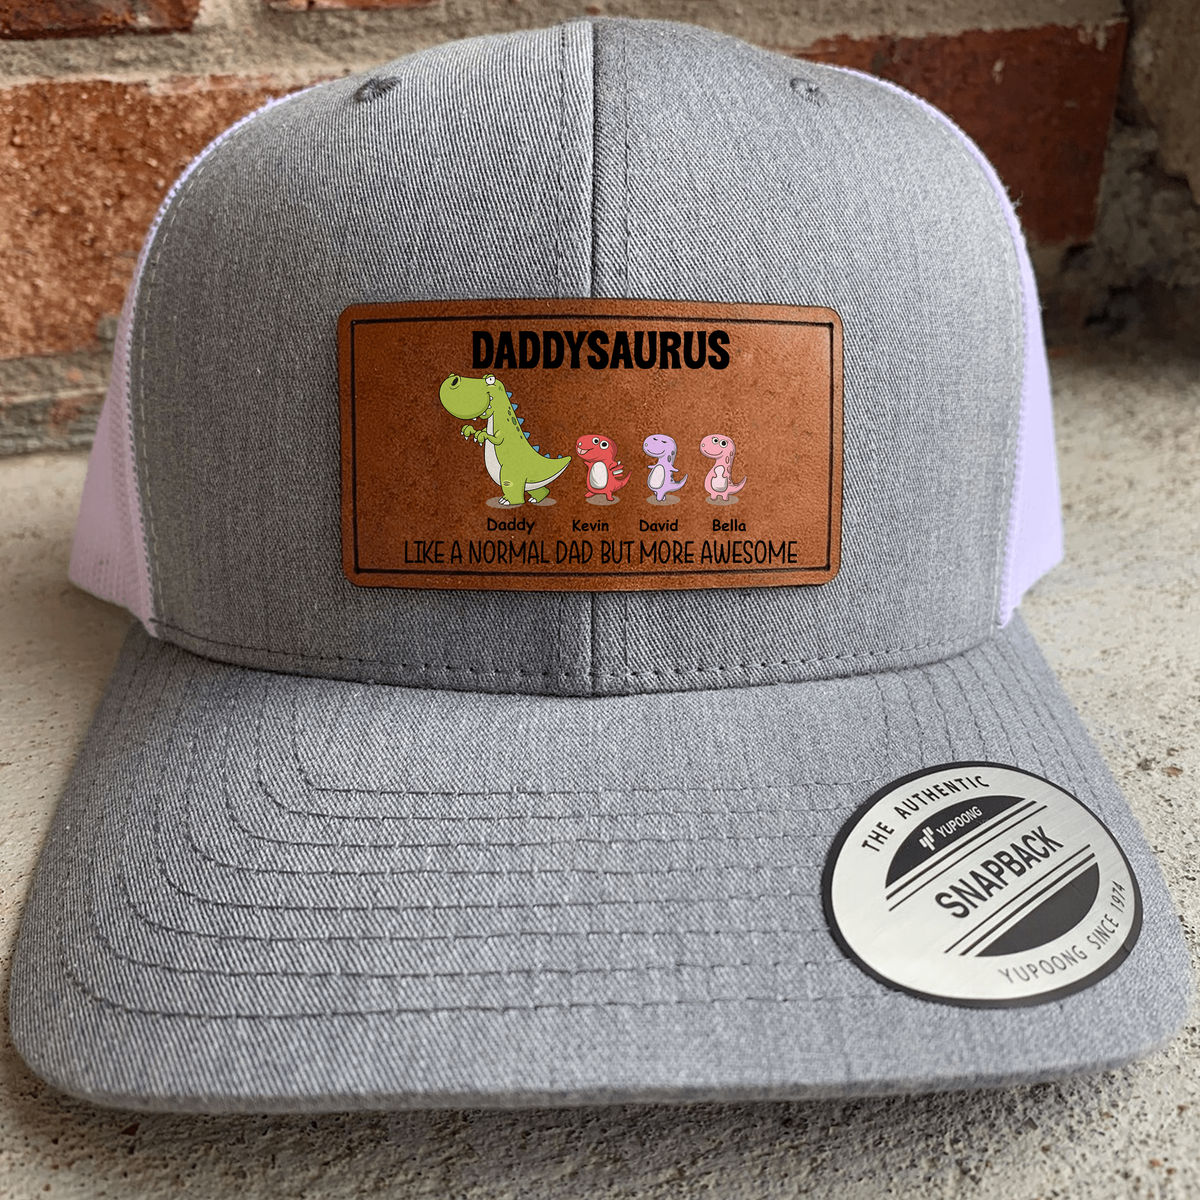 Father's Day Gifts - Dadasaurus Like a normal Dad but more Awesome - Personalized cap